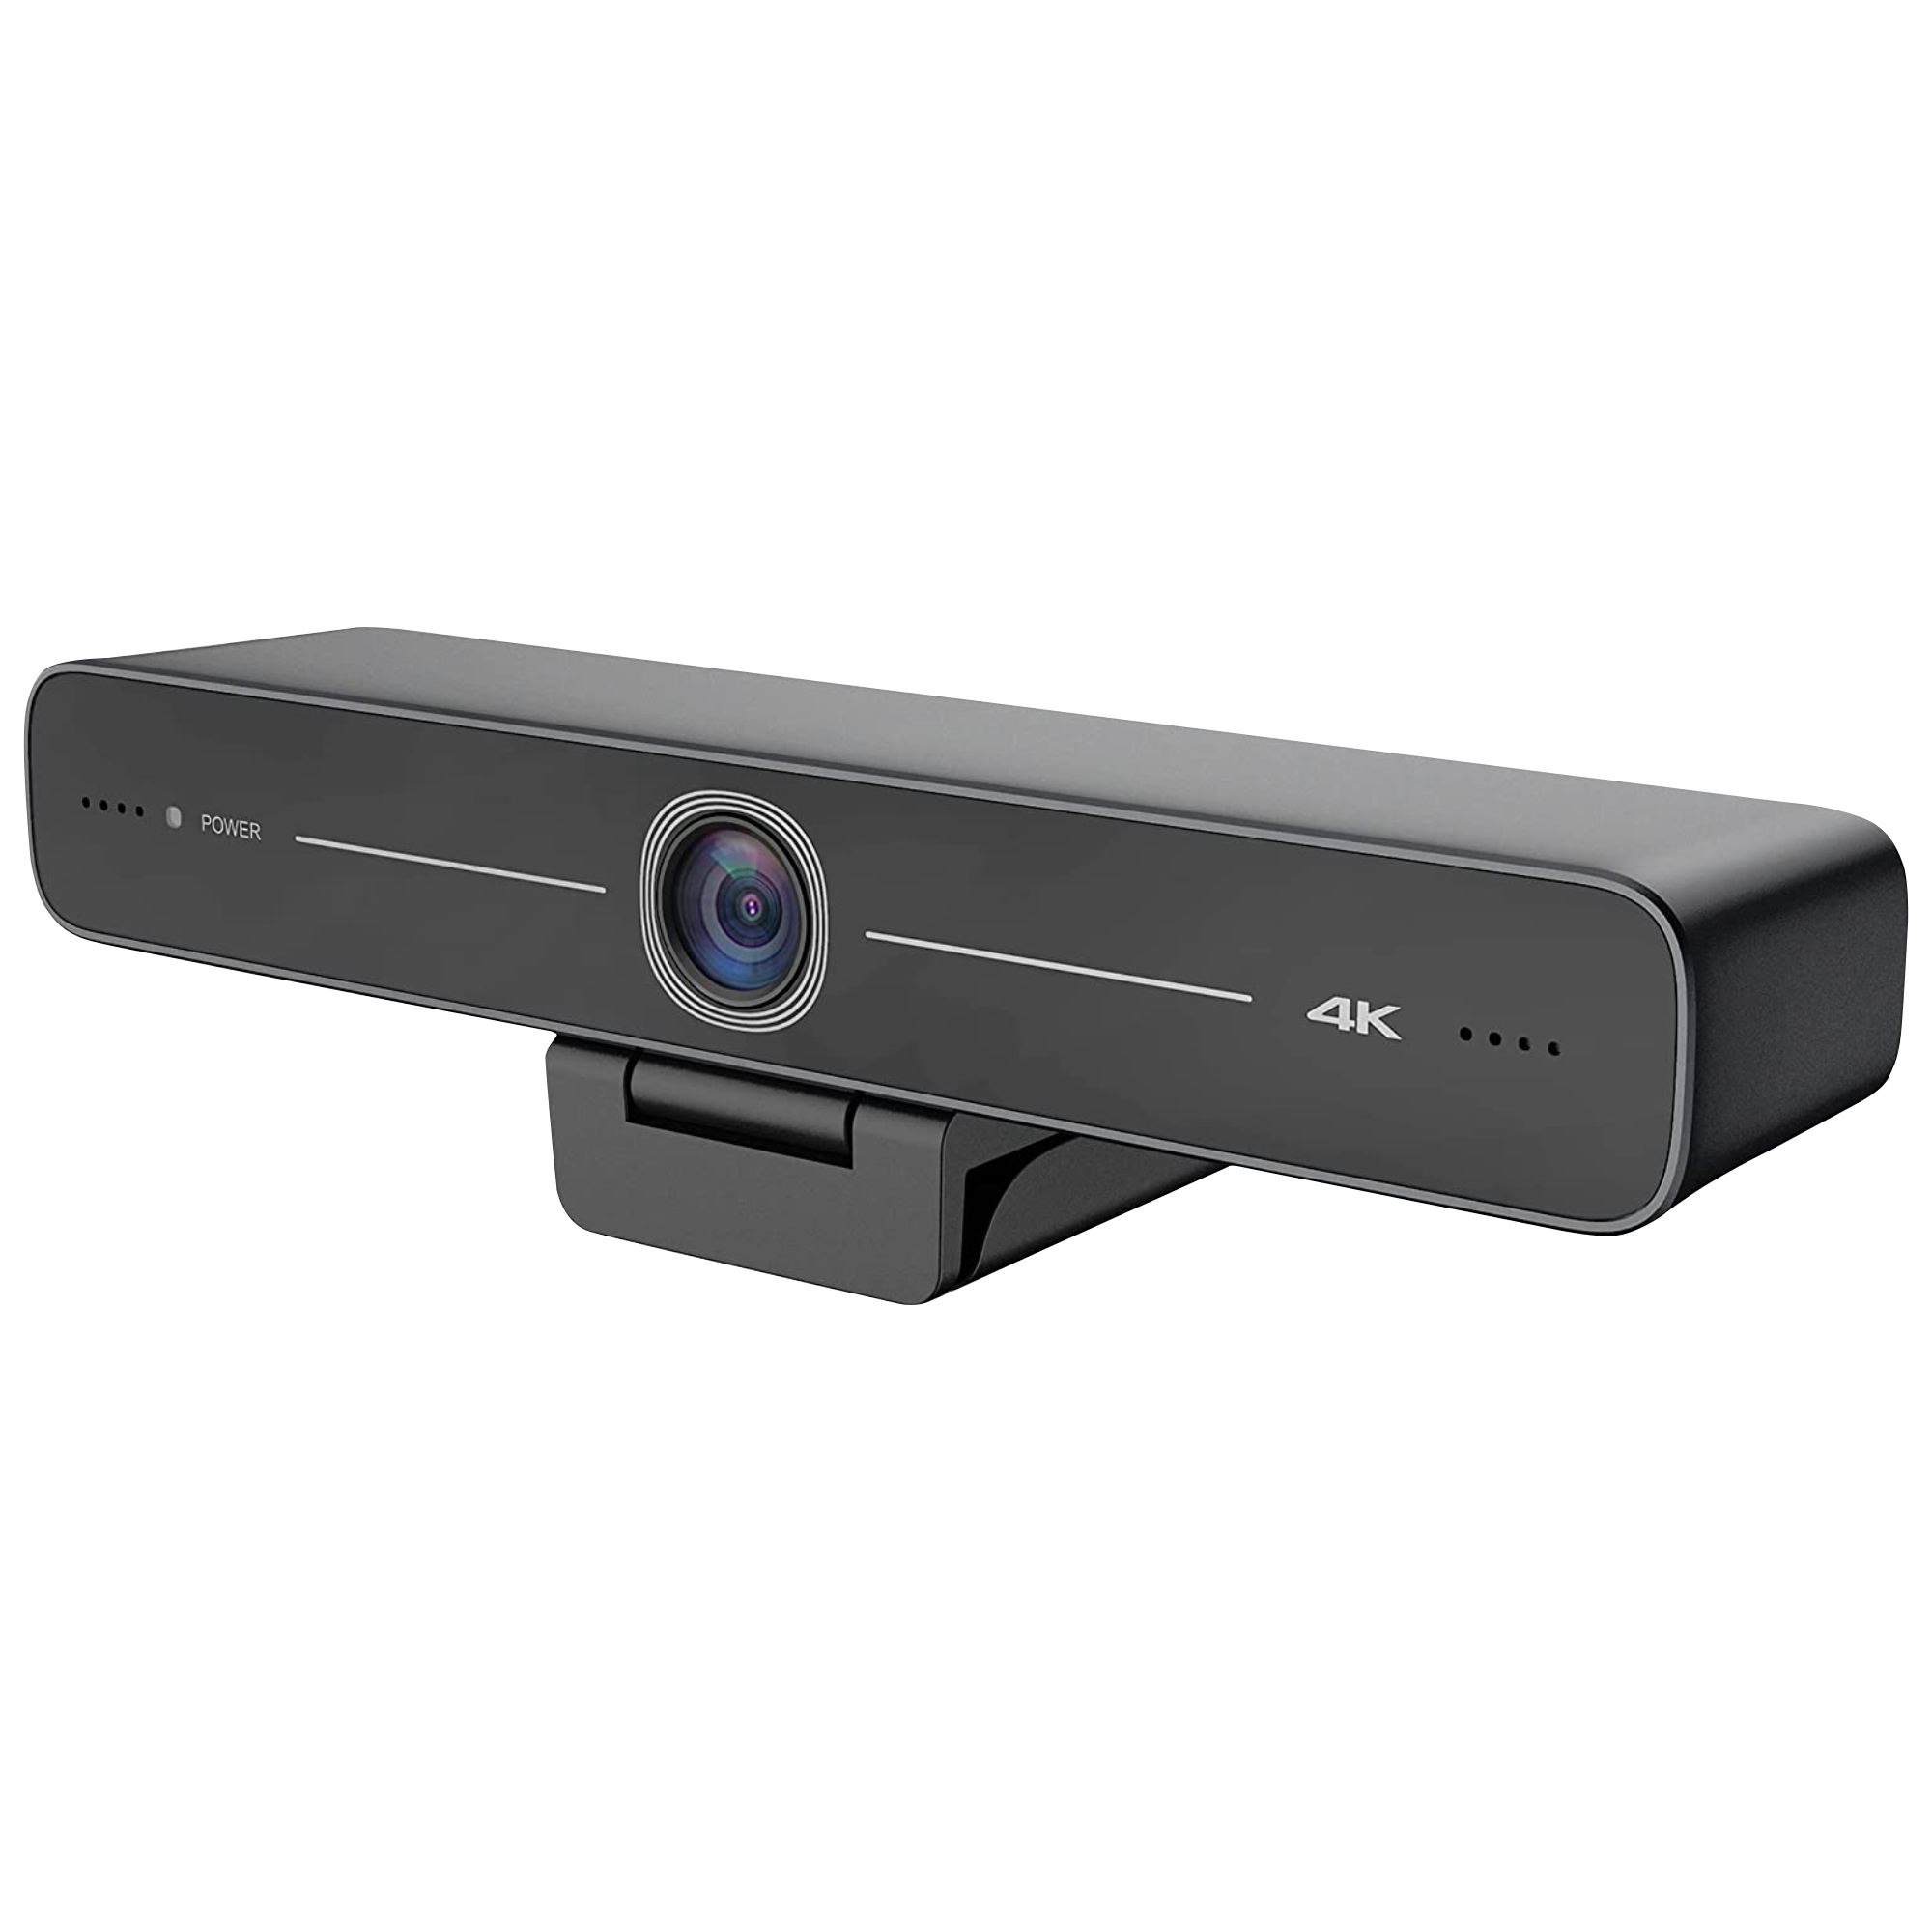 VIDEO CONFERENCE WIDE ANGLE 100 DEGREE WEBCAM 4K - VC0003